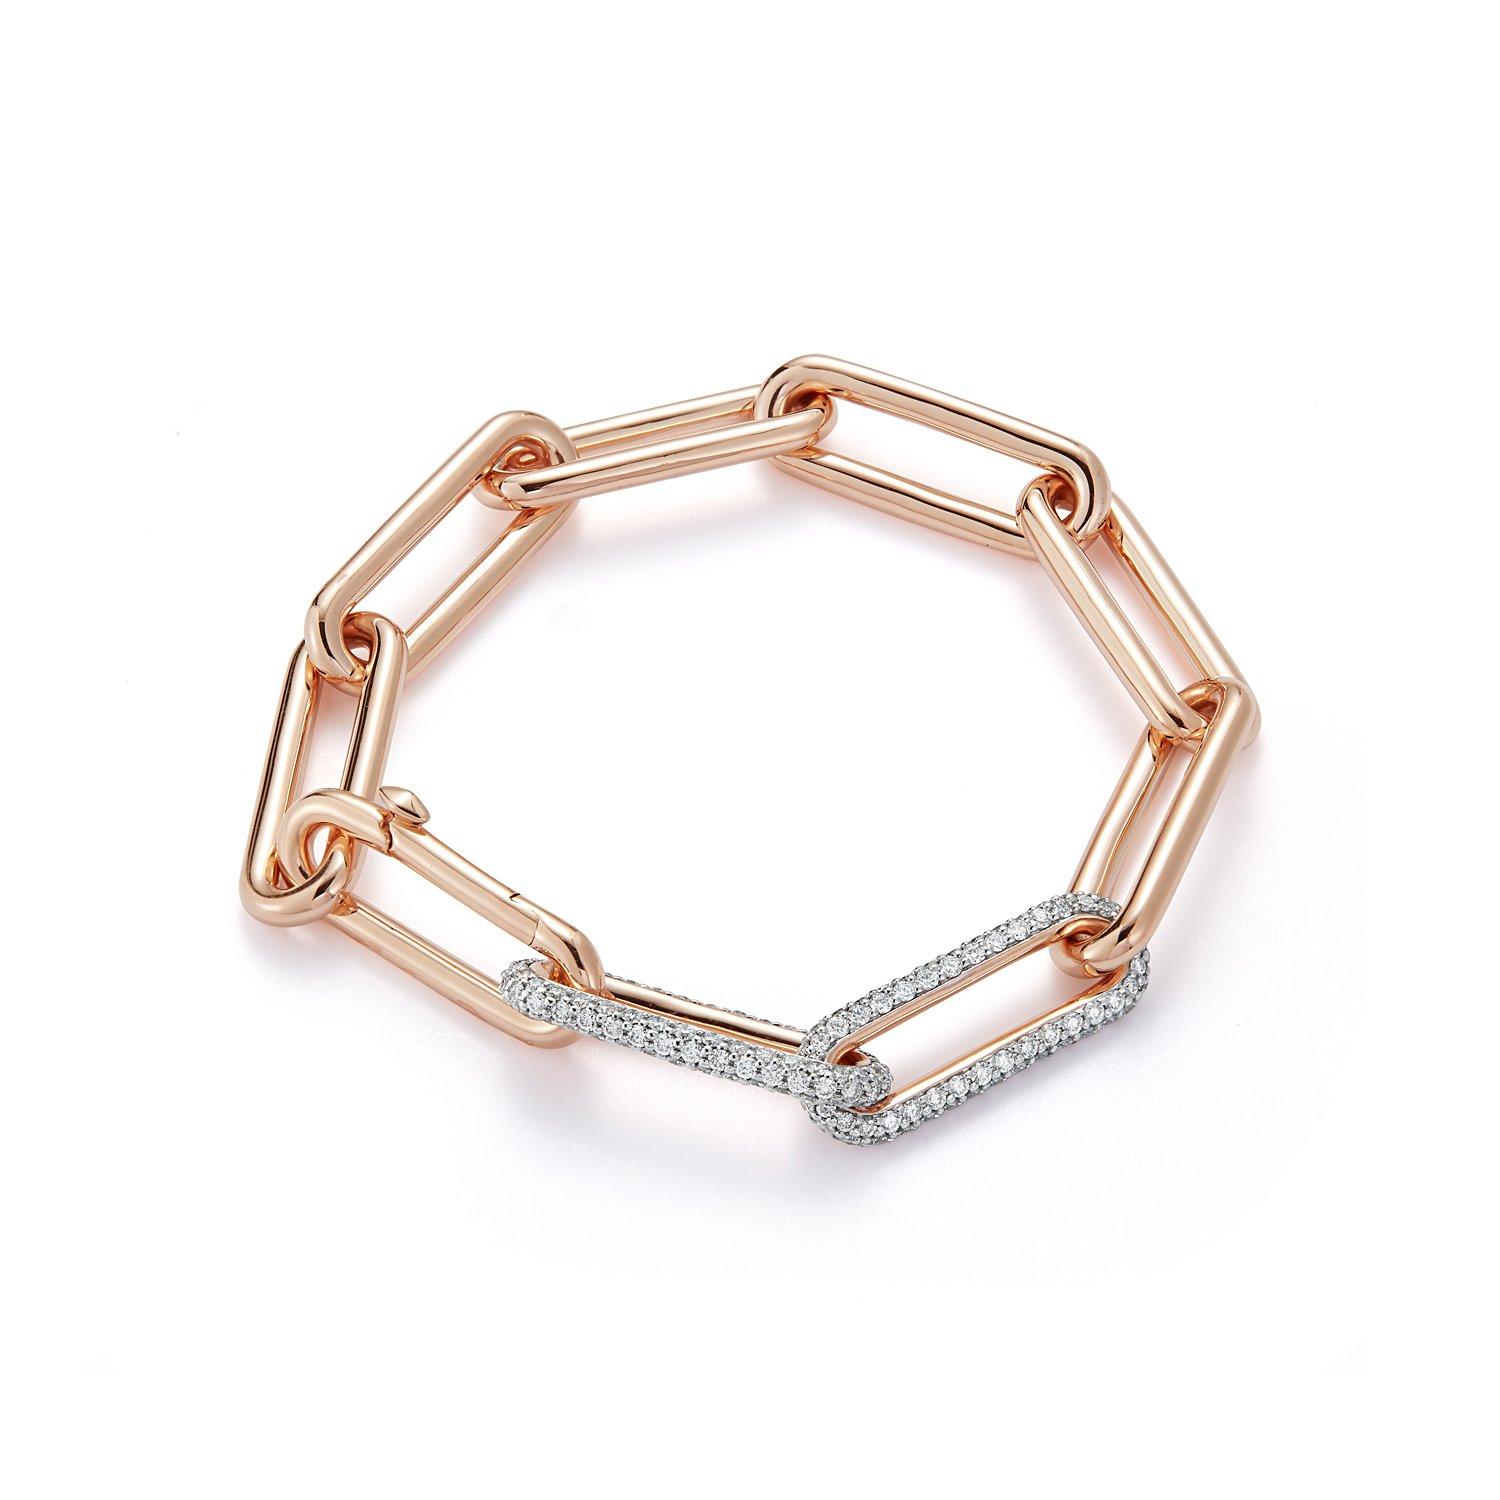 Walters Faith's Saxon Collection 18K Rose Gold Elongated Chain Link Bracelet with 2 White Rhodium Diamond Links. Available with black rhodium as well. Bracelet has 9 links and measures 6.5